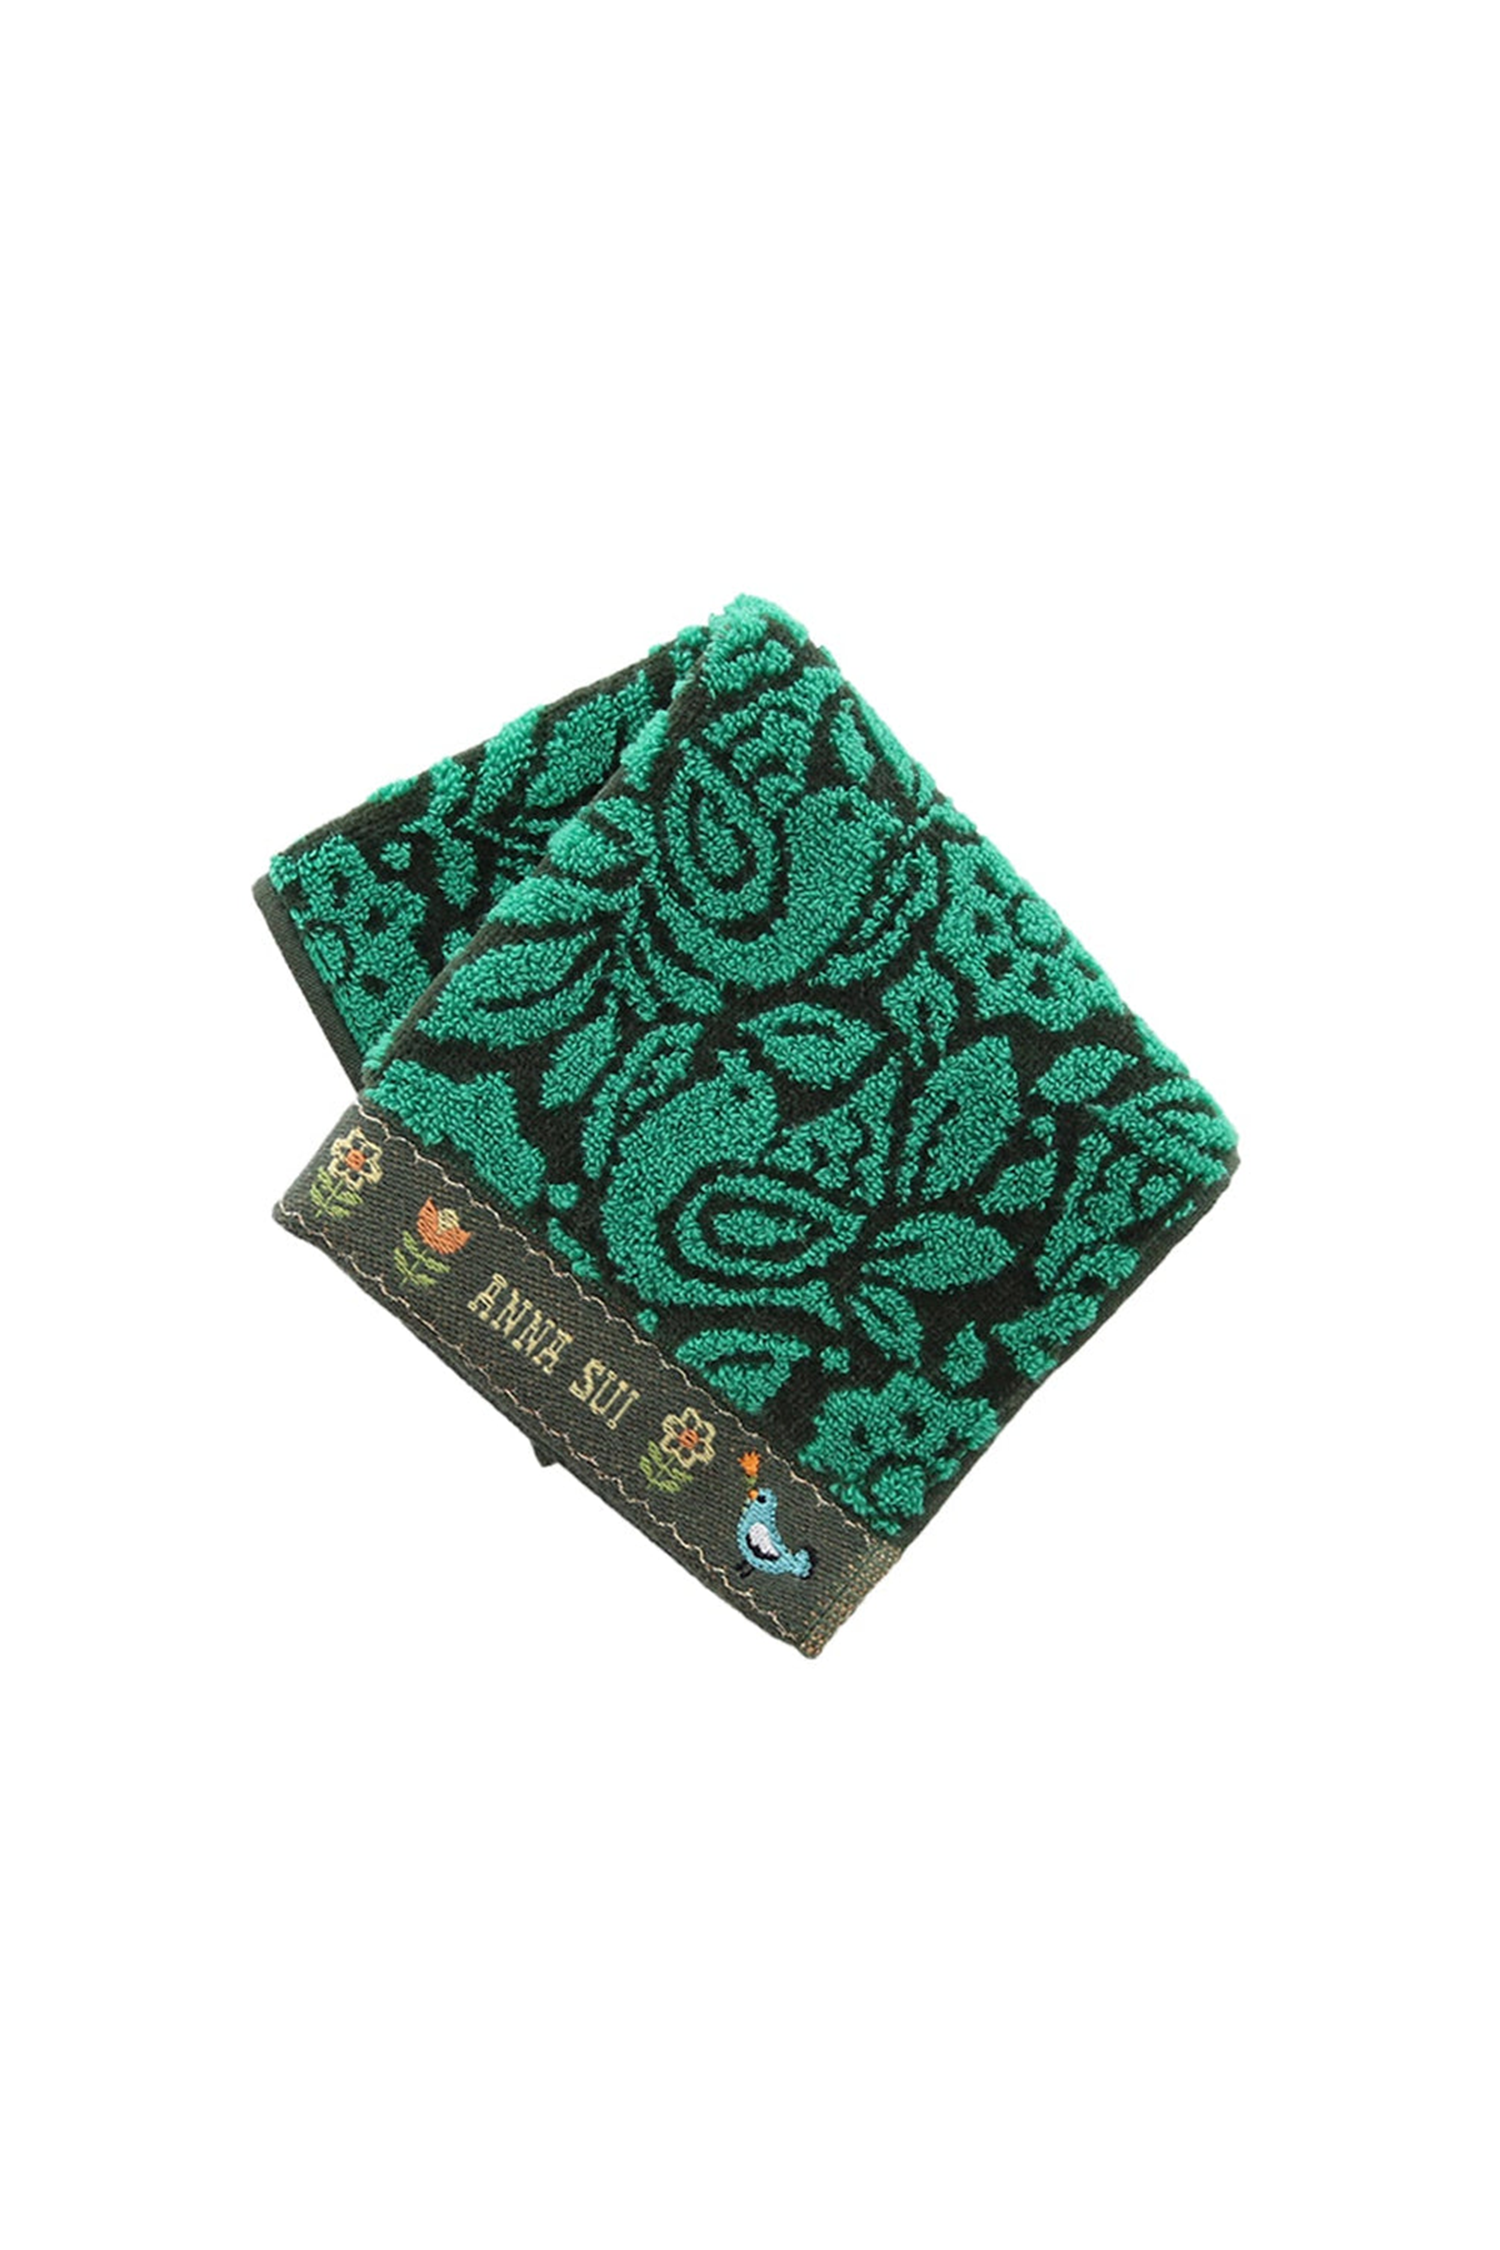 Birds of Paradise Washcloth, green border bottom with Anna Sui label, a blue bird, line of flowers